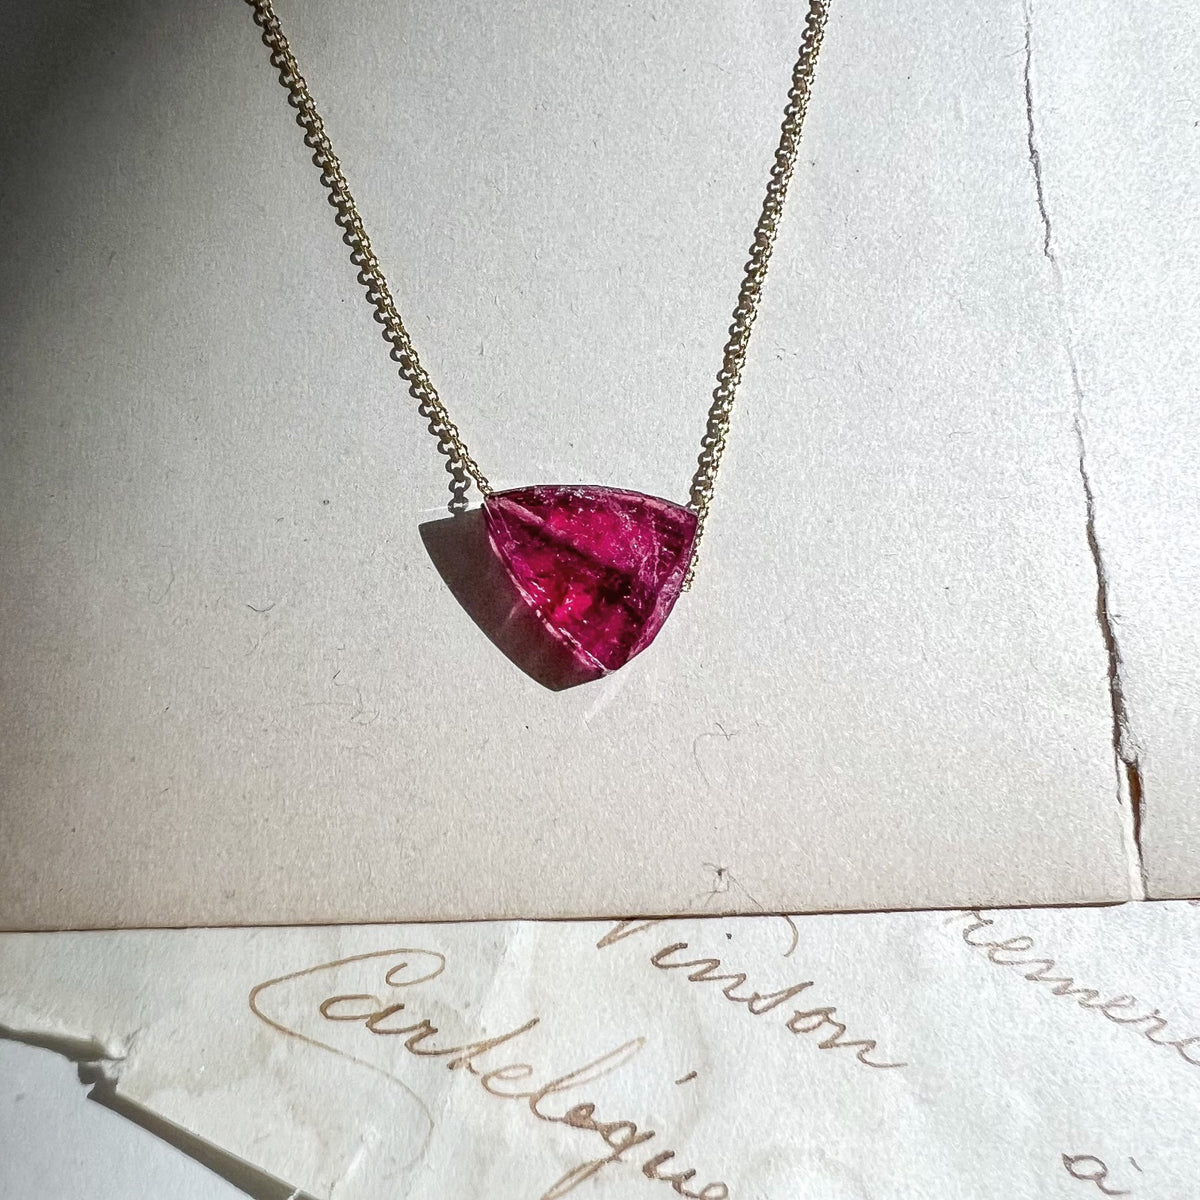 Heirloom Rose Reuleaux Tourmaline Necklace